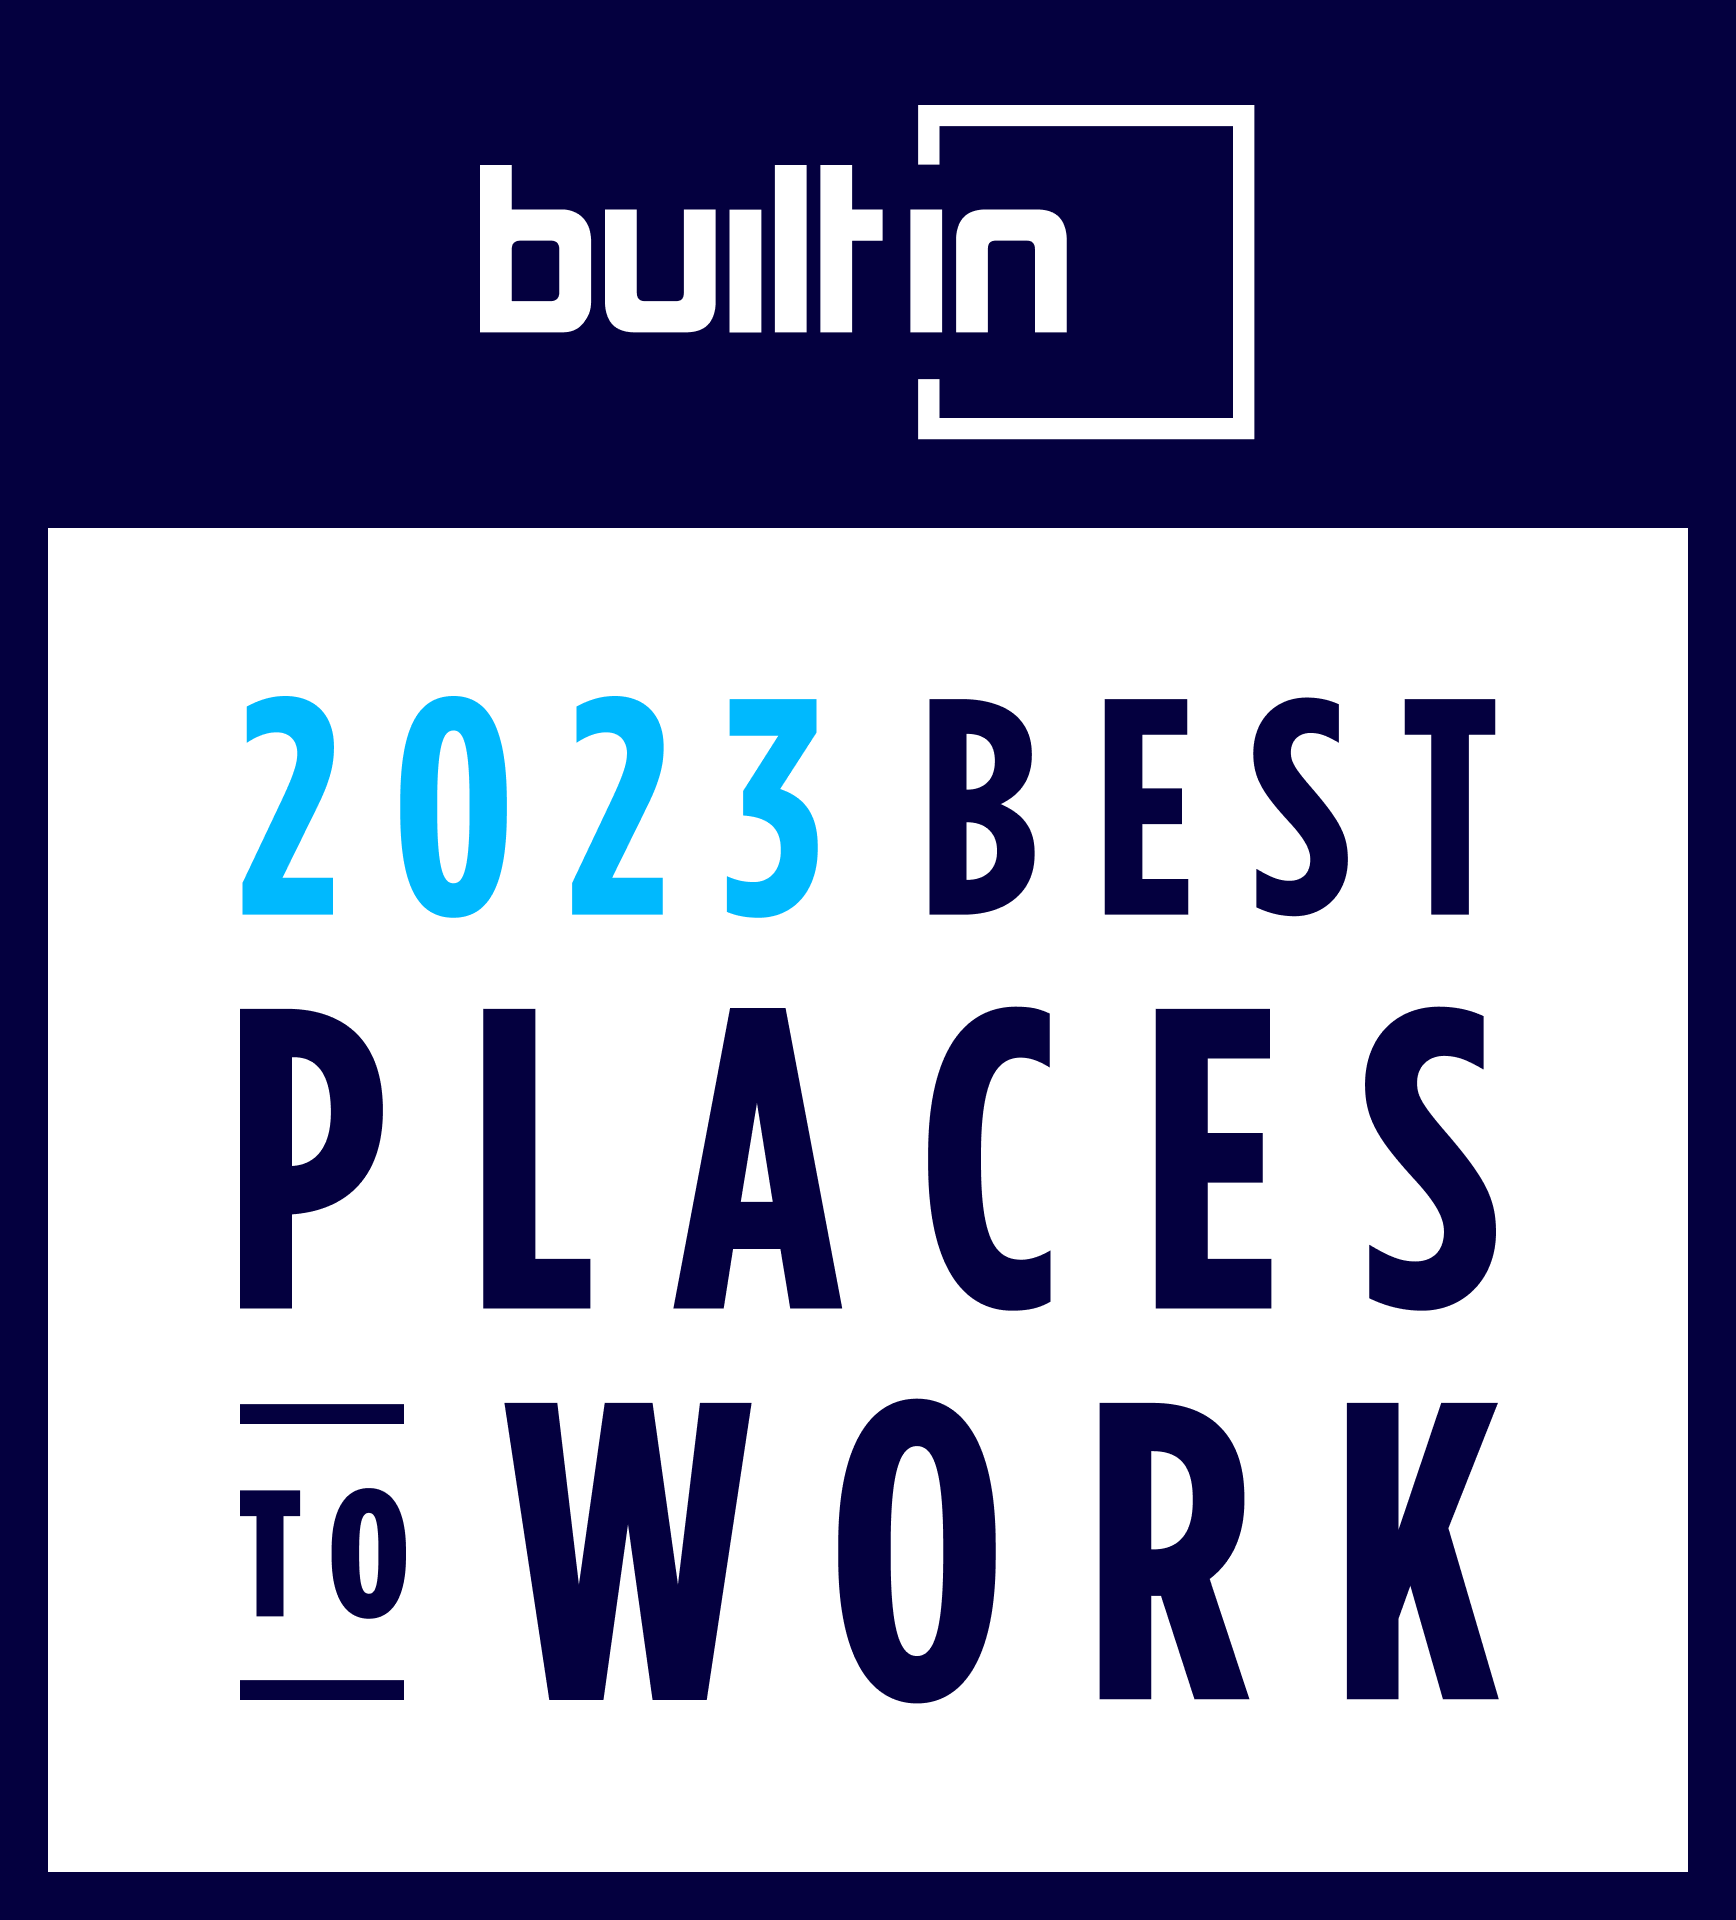 Built In Honors Cin7 in Its Esteemed 2023 Best Places To Work Awards